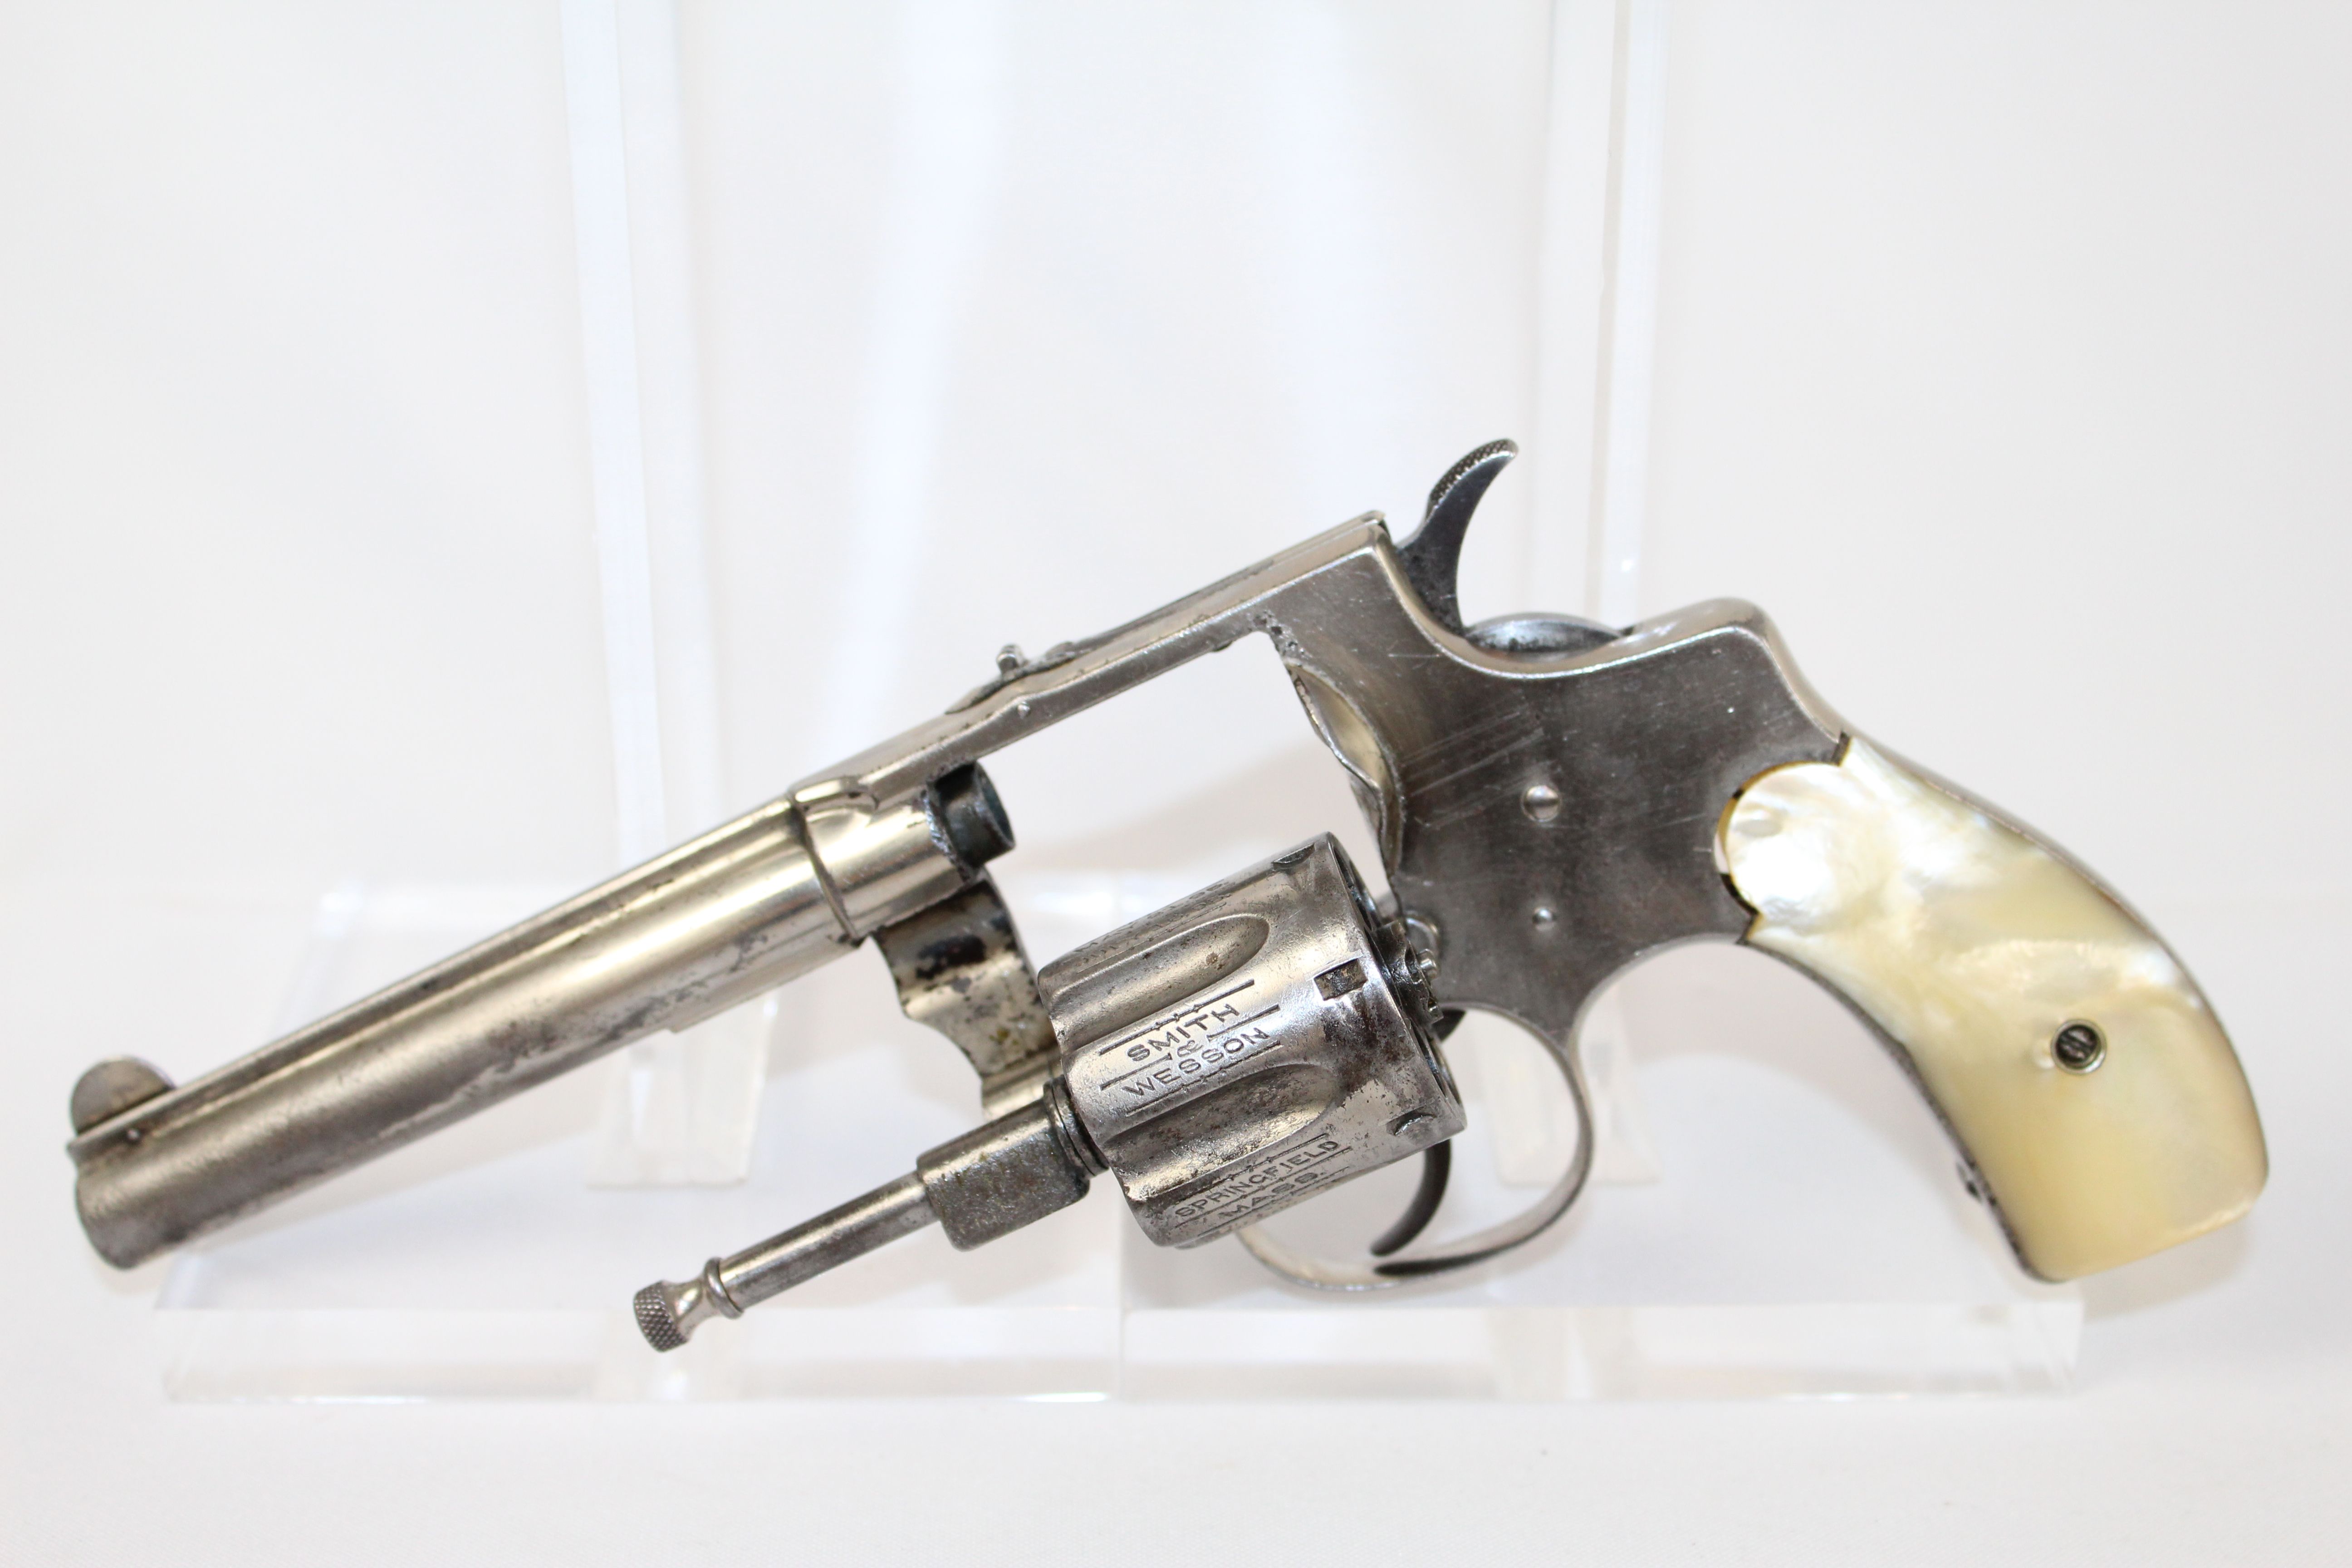 Smith & Wesson .32 S&W Hand Ejector Revolver Antique Firearms 007 ...